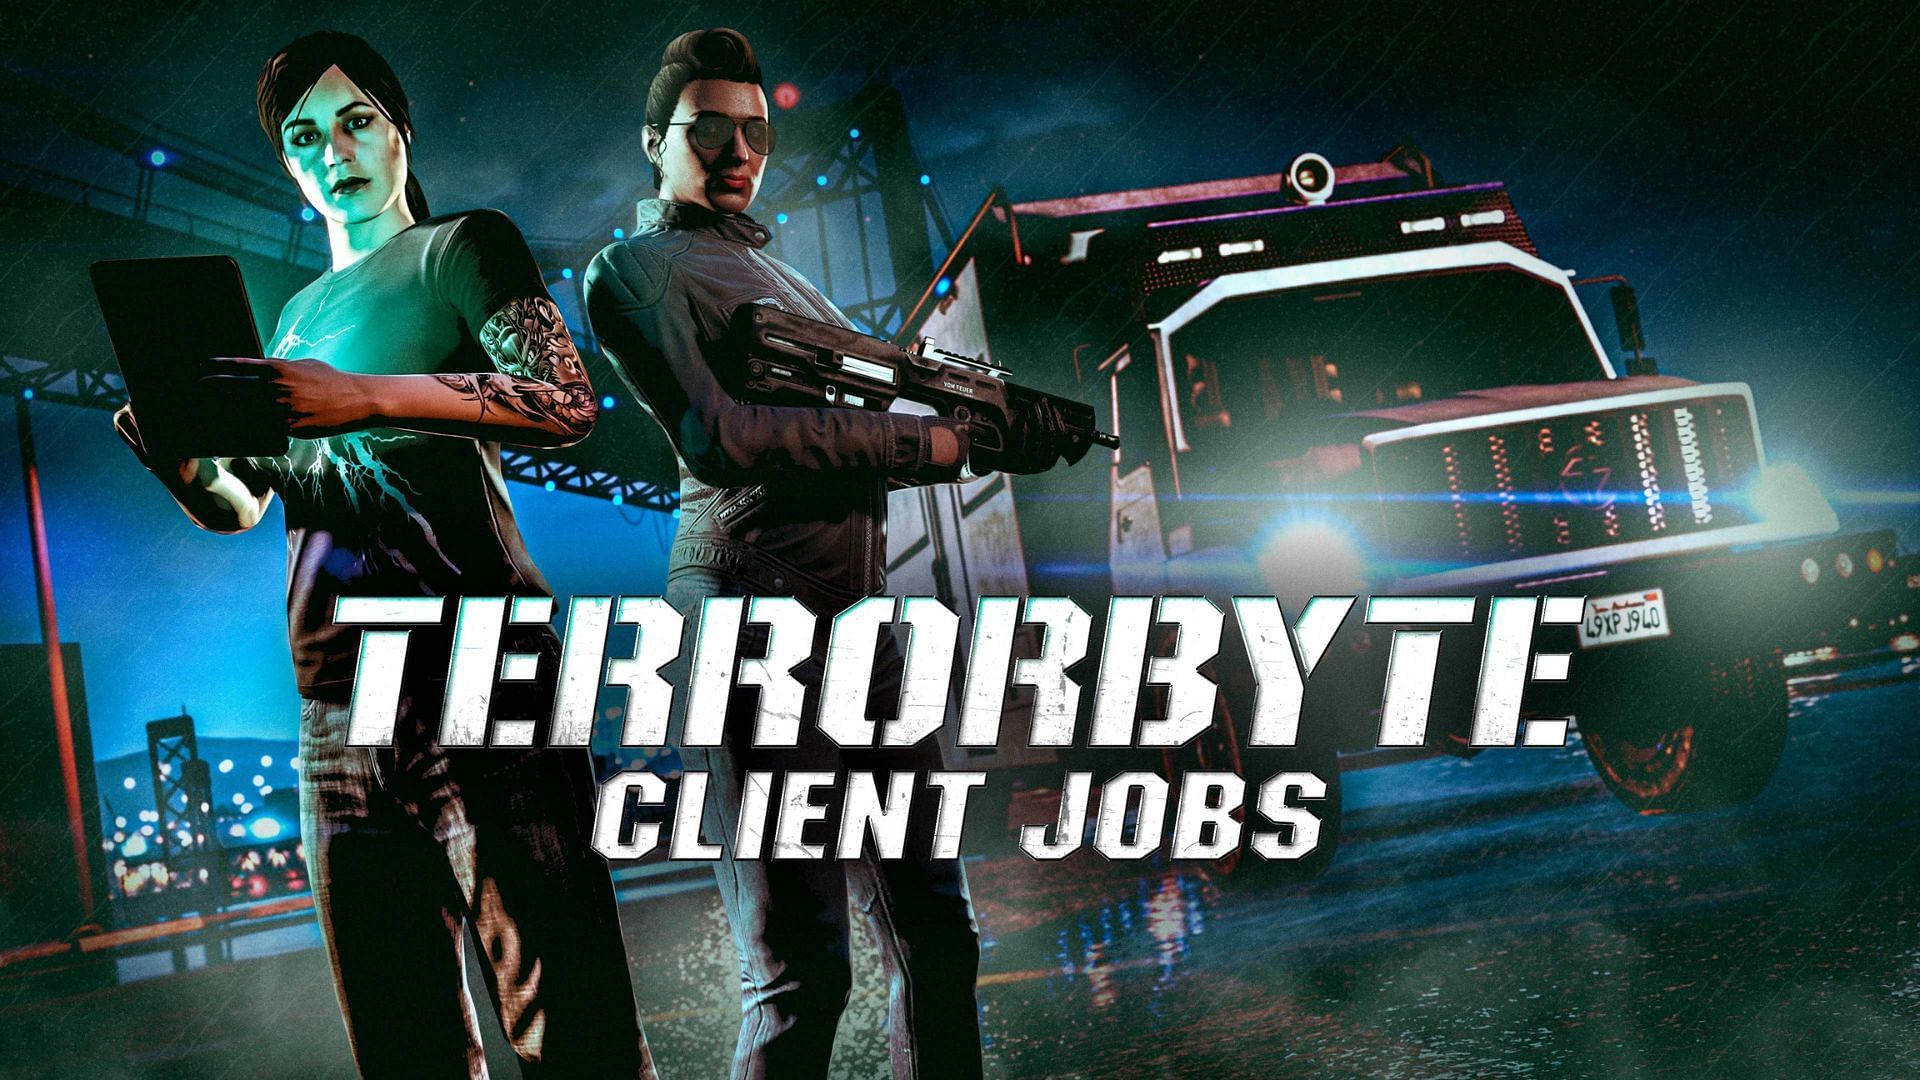 An official image of Terrorbyte Client Jobs (Image via Rockstar Games)